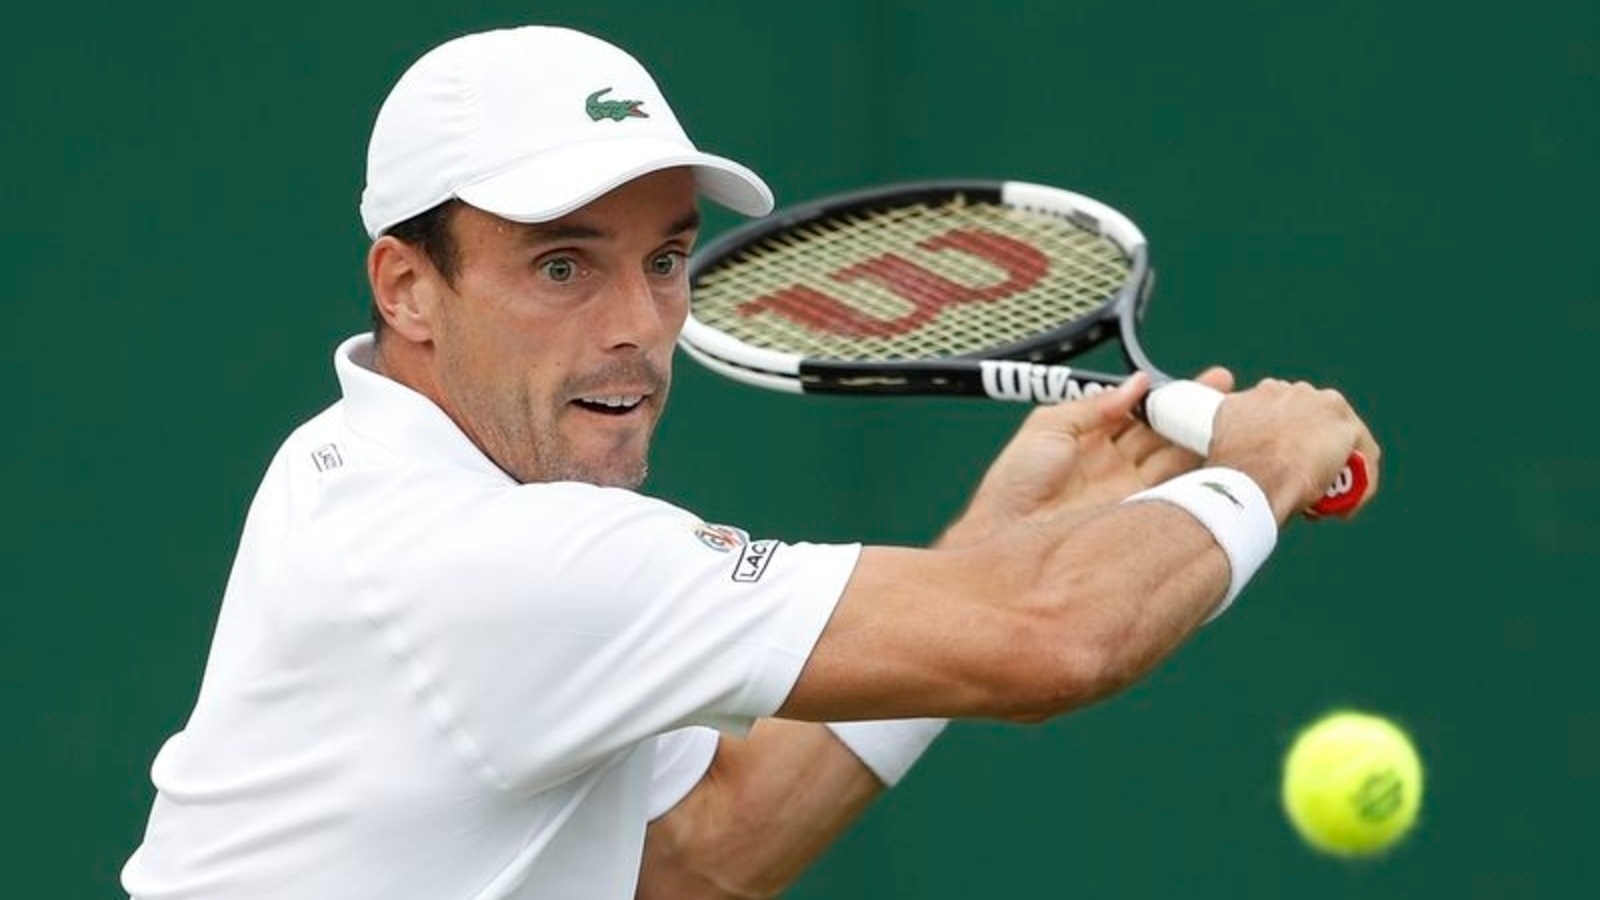 Spaniard Bautista Agut latest to pull out of Wimbledon due to Covid-19 Tennis News